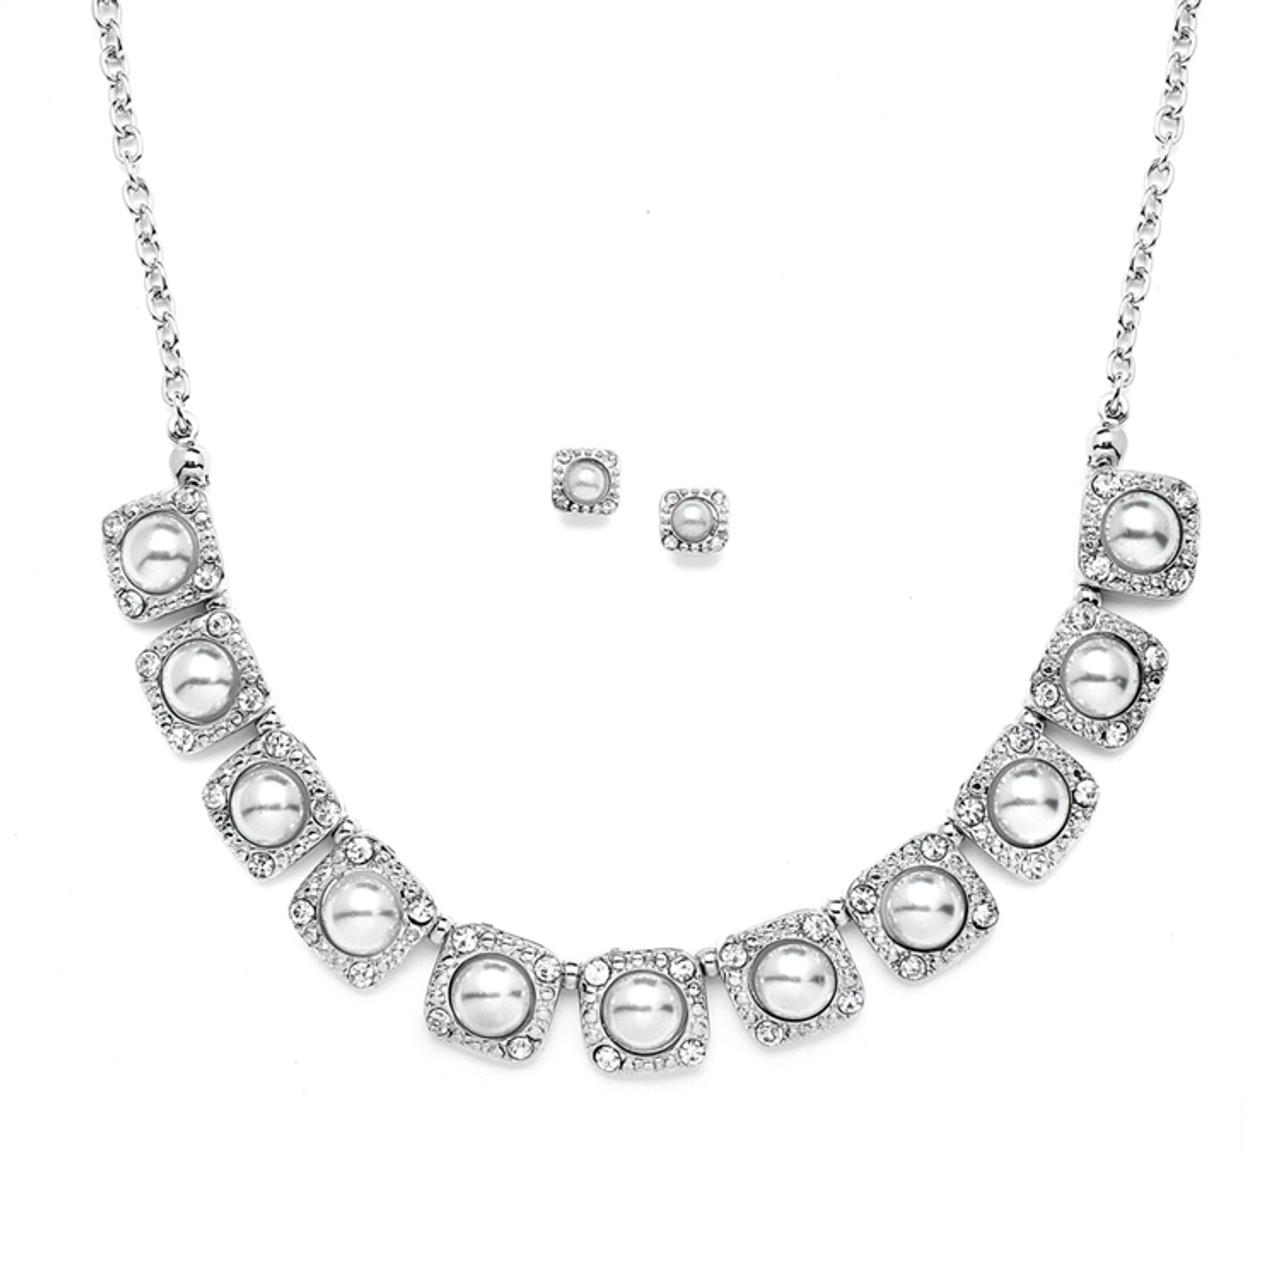 Mariell Bridals Vintage Wedding Necklace and Earring Set with Silvery White Pearls 4244S